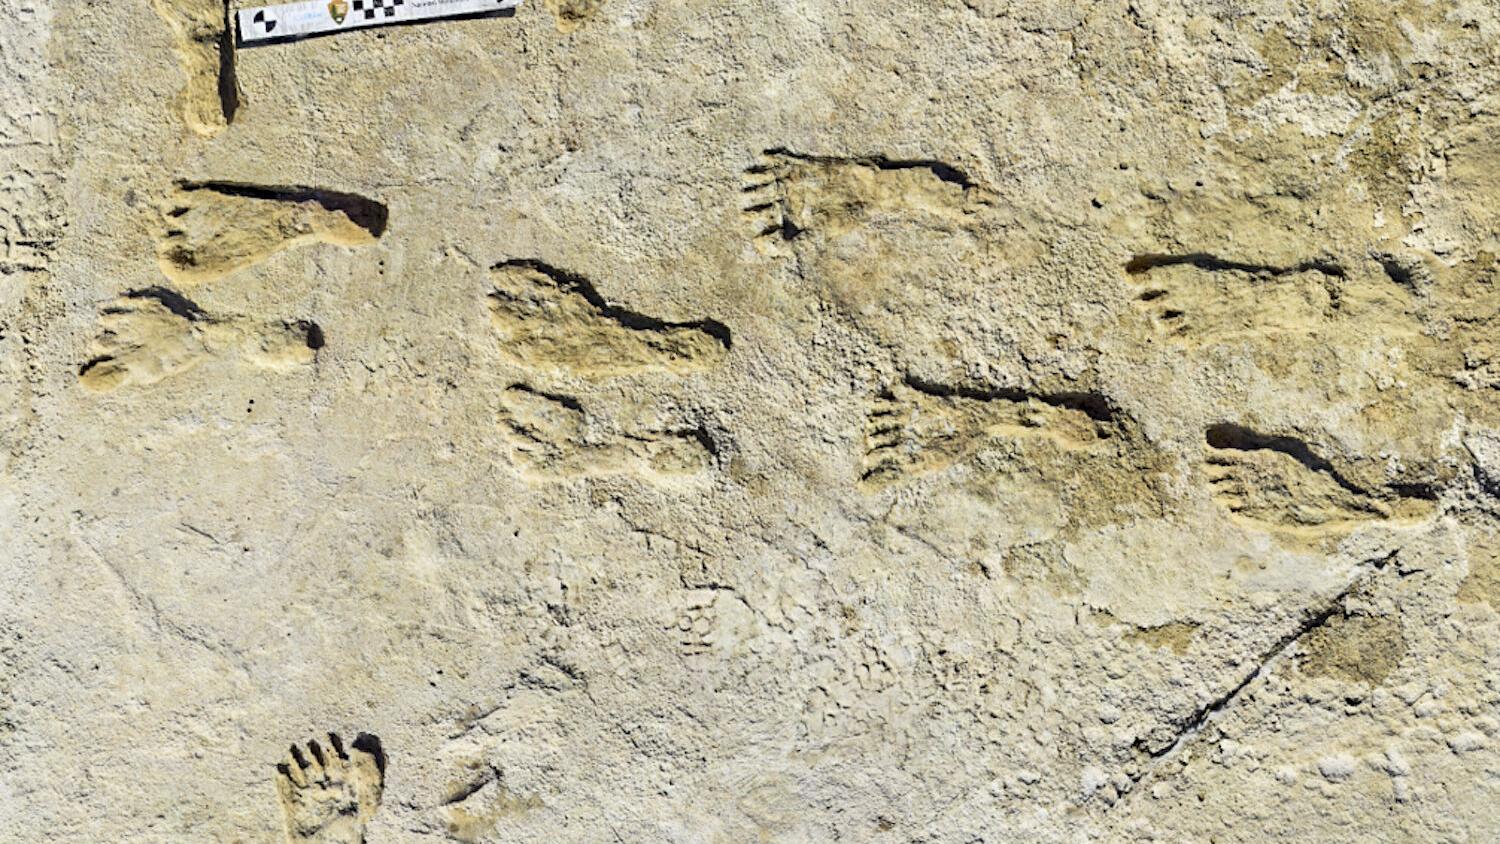 Evidence points to footprints in New Mexico as oldest sign of humans in Americas | OUT WEST ROUNDUP | News | coloradopolitics.com